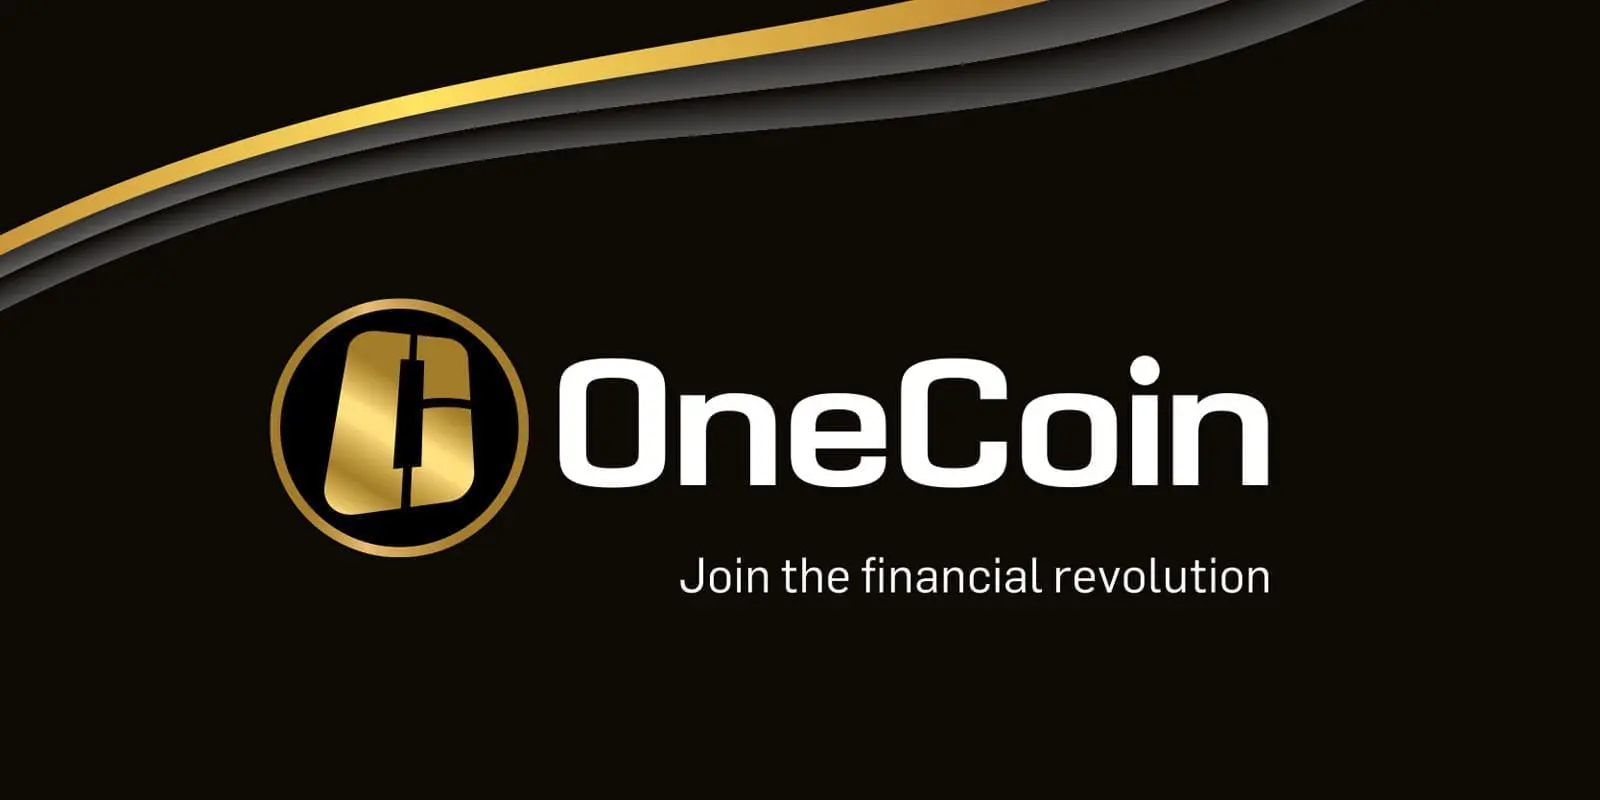 Logo of OneCoin, depicted with a stylized gold coin, underlined by the slogan "Join the financial revolution".